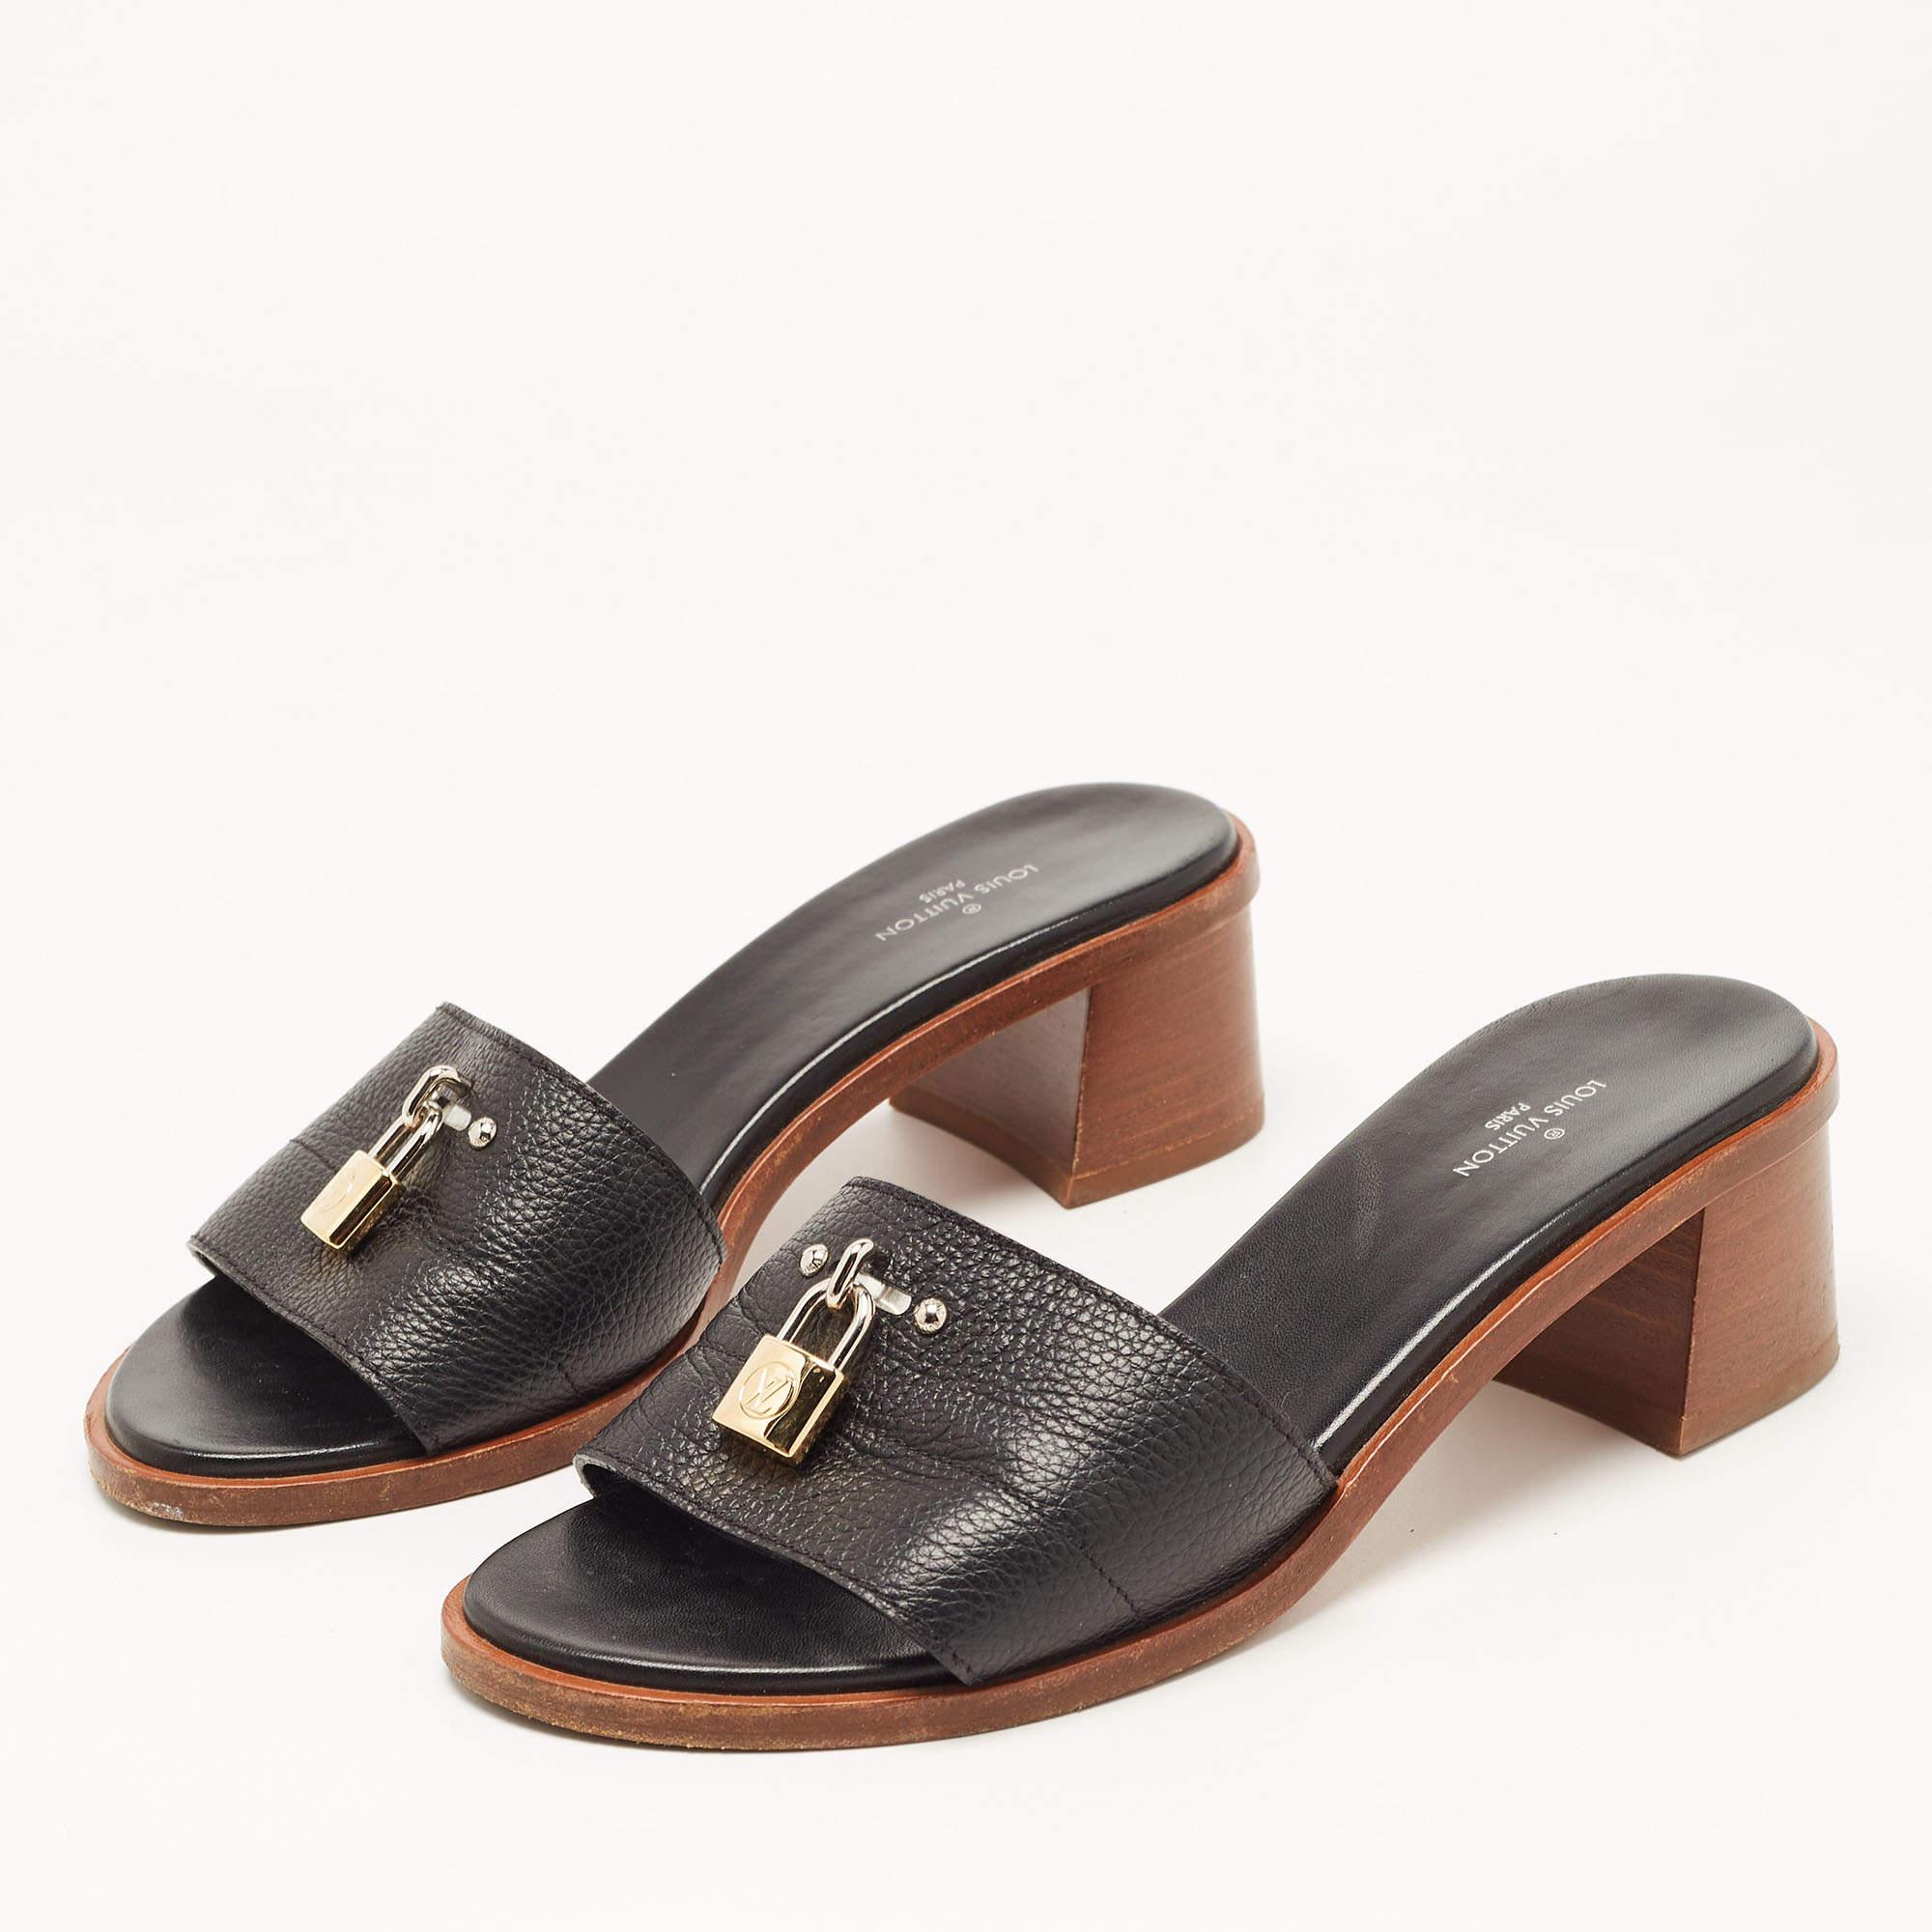 These sandals embody the perfect blend of edgy and timeless style. Crafted from quality materials, these shoes will offer you the perfect height for a sophisticated look.

